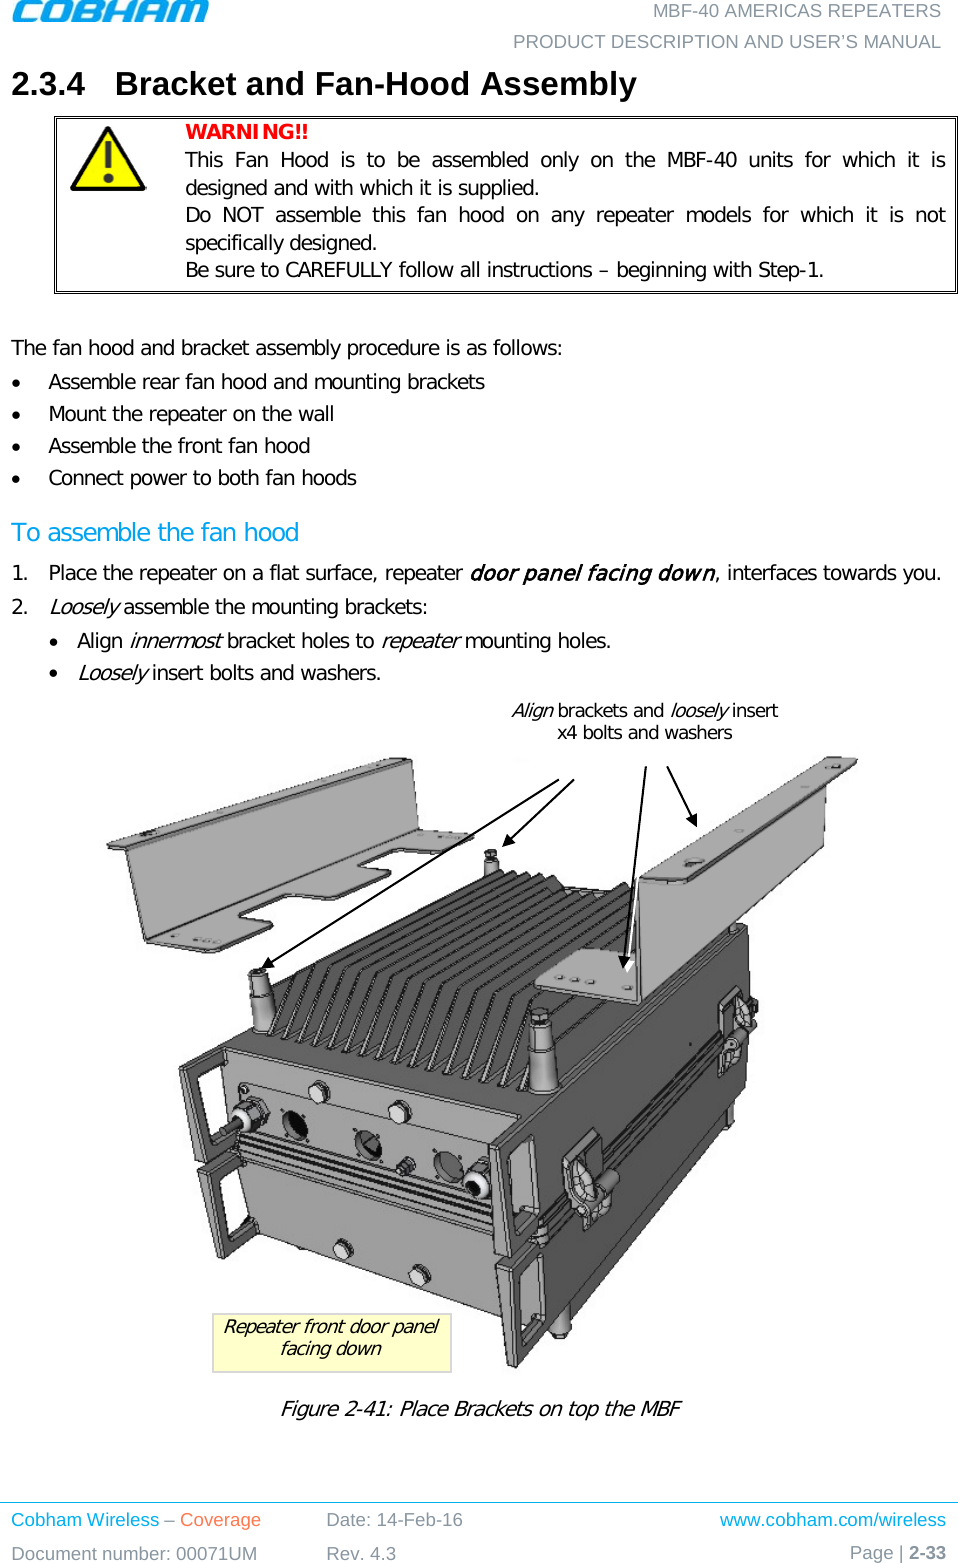   MBF-40 AMERICAS REPEATERS PRODUCT DESCRIPTION AND USER’S MANUAL Cobham Wireless – Coverage Date: 14-Feb-16 www.cobham.com/wireless Document number: 00071UM Rev. 4.3 Page | 2-33  2.3.4  Bracket and Fan-Hood Assembly  WARNING!!  This Fan Hood is to be assembled only on the MBF-40 units for which it is designed and with which it is supplied. Do NOT assemble this fan hood on any repeater models for which it is not specifically designed. Be sure to CAREFULLY follow all instructions – beginning with Step-1.  The fan hood and bracket assembly procedure is as follows: • Assemble rear fan hood and mounting brackets • Mount the repeater on the wall • Assemble the front fan hood • Connect power to both fan hoods  To assemble the fan hood 1.  Place the repeater on a flat surface, repeater door panel facing down, interfaces towards you.  2.  Loosely assemble the mounting brackets: • Align innermost bracket holes to repeater mounting holes. • Loosely insert bolts and washers.   Figure  2-41: Place Brackets on top the MBF    Repeater front door panel facing down Align brackets and loosely insert x4 bolts and washers 